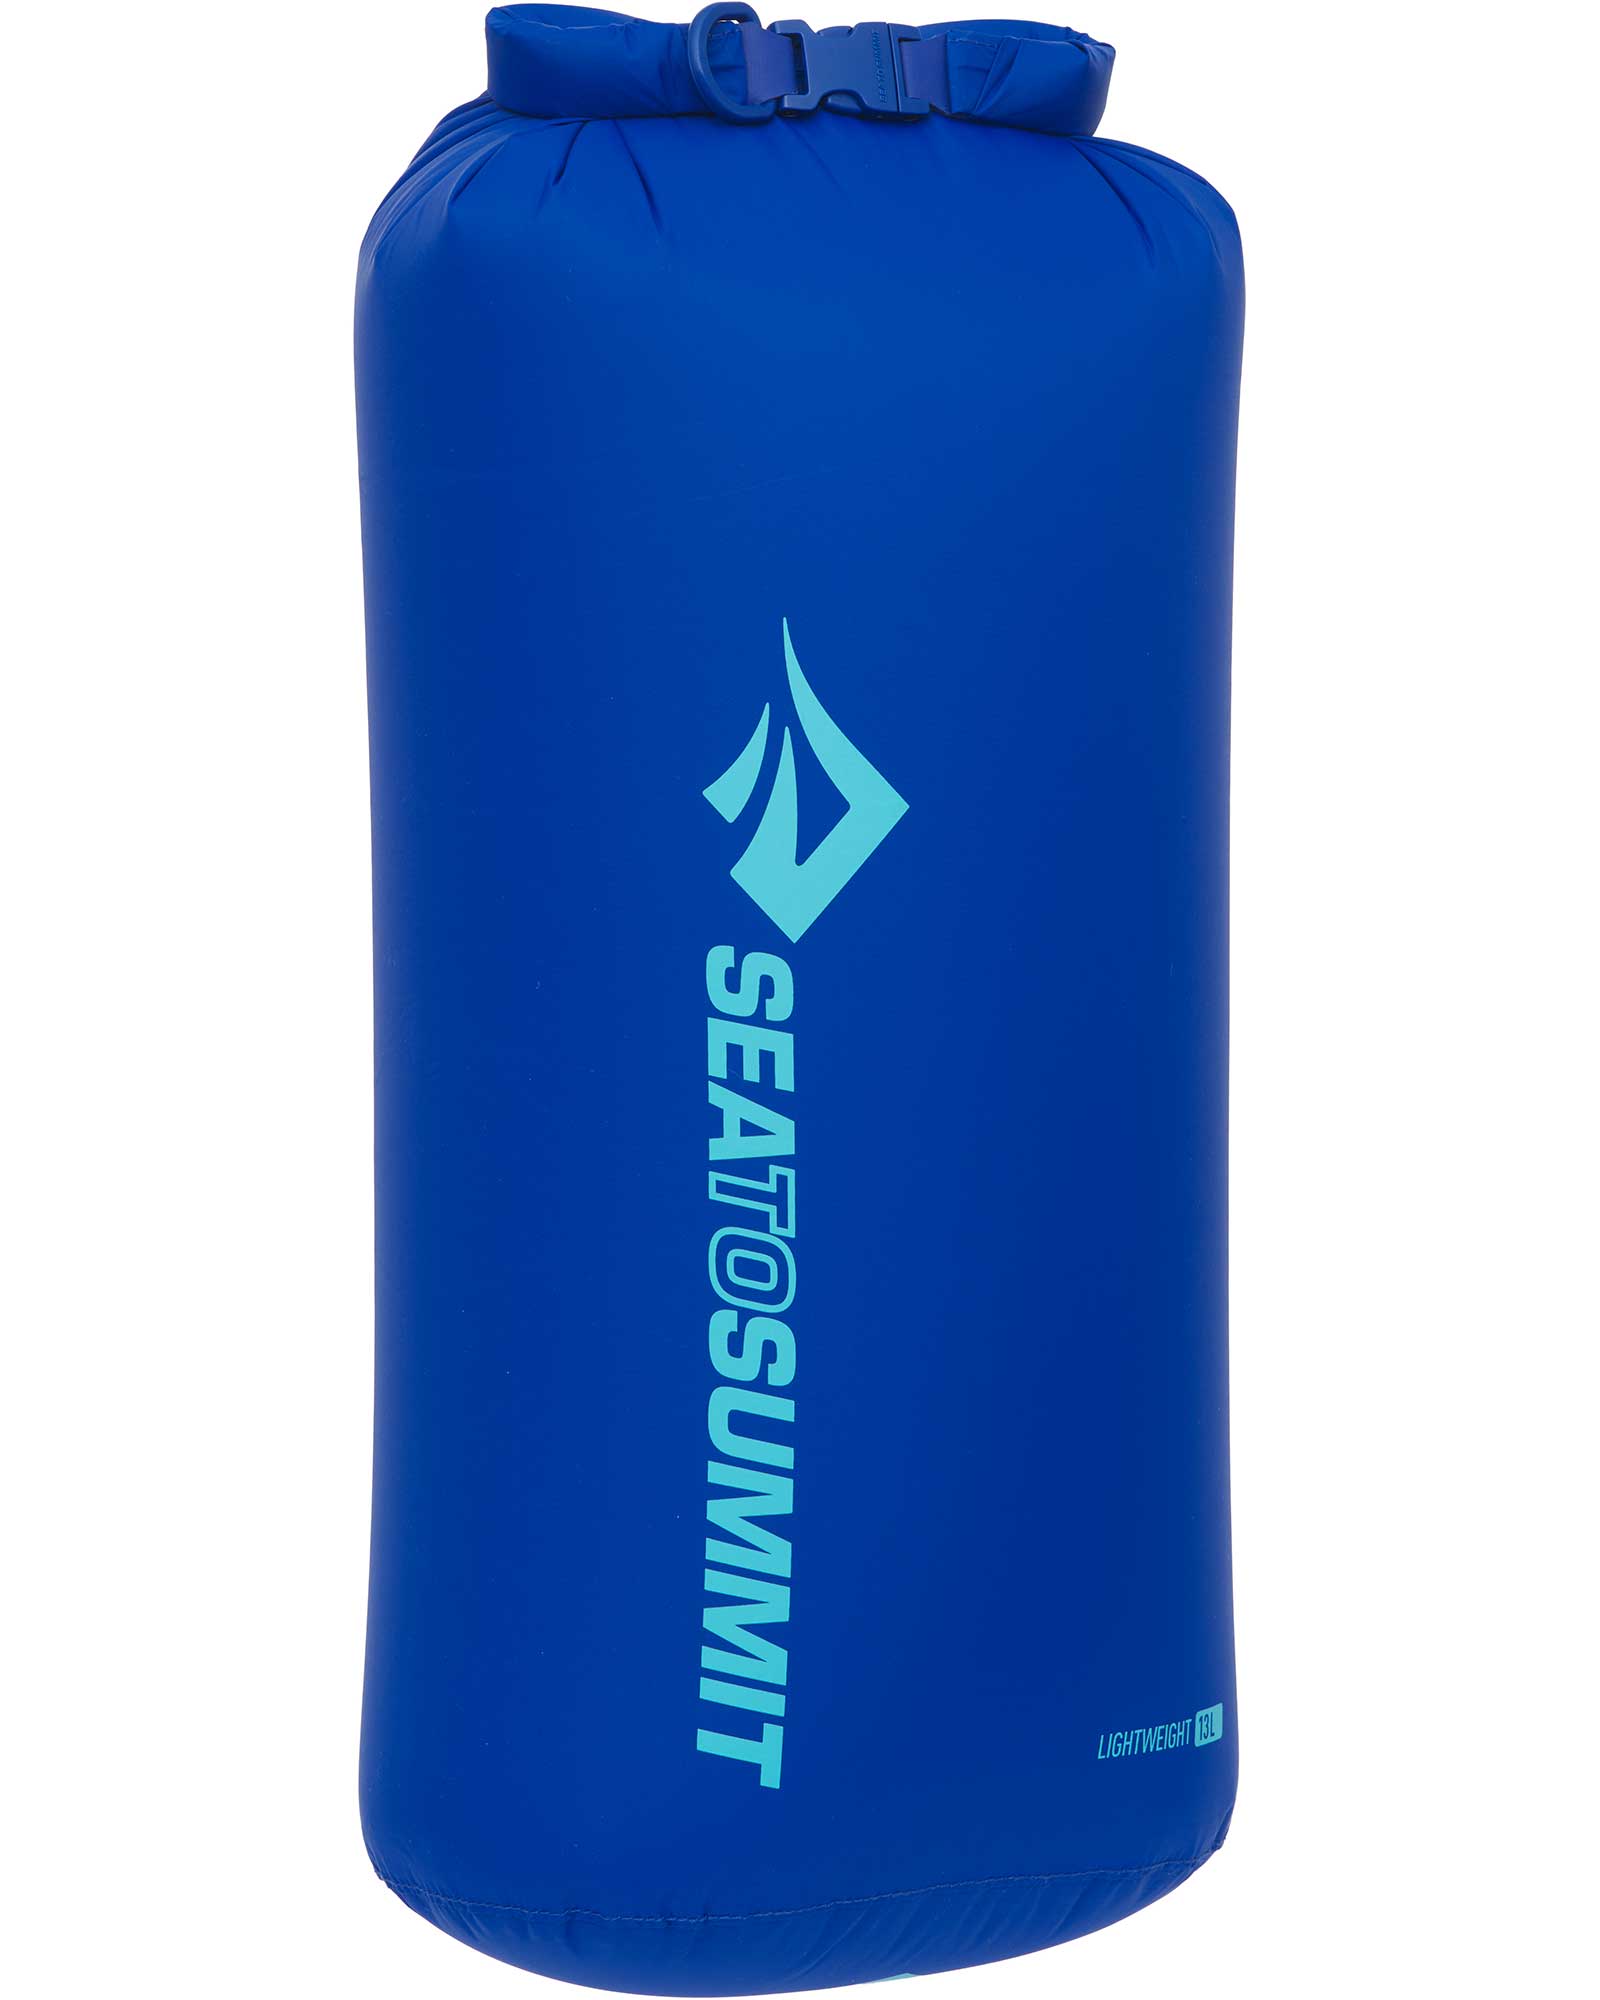 Sea to Summit Lightweight 13L Dry Bag - Surf the Web